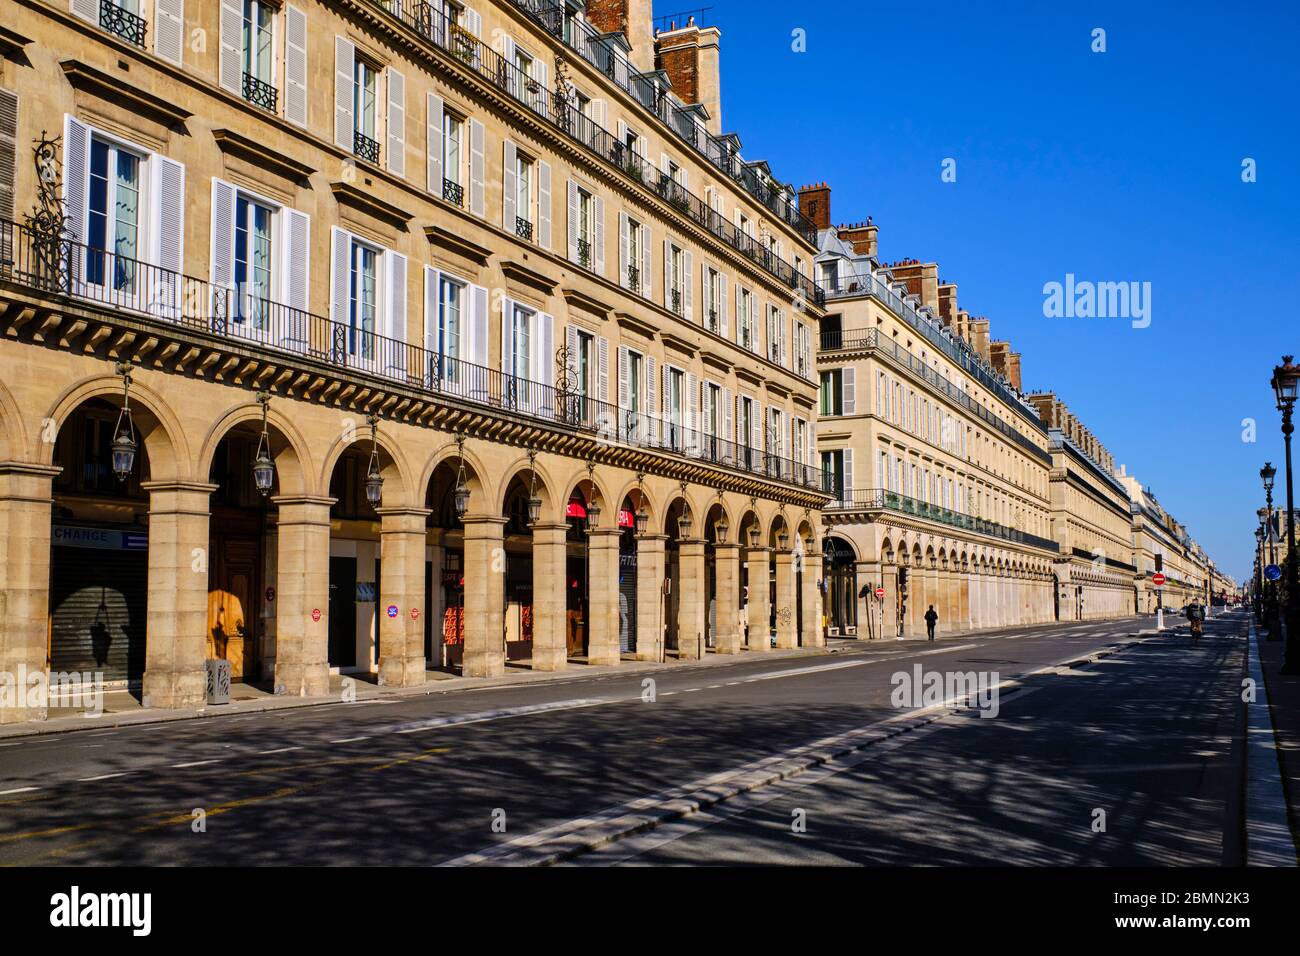 France, Paris, Louvre museuml during the lockdown of Covid 19 Stock Photo